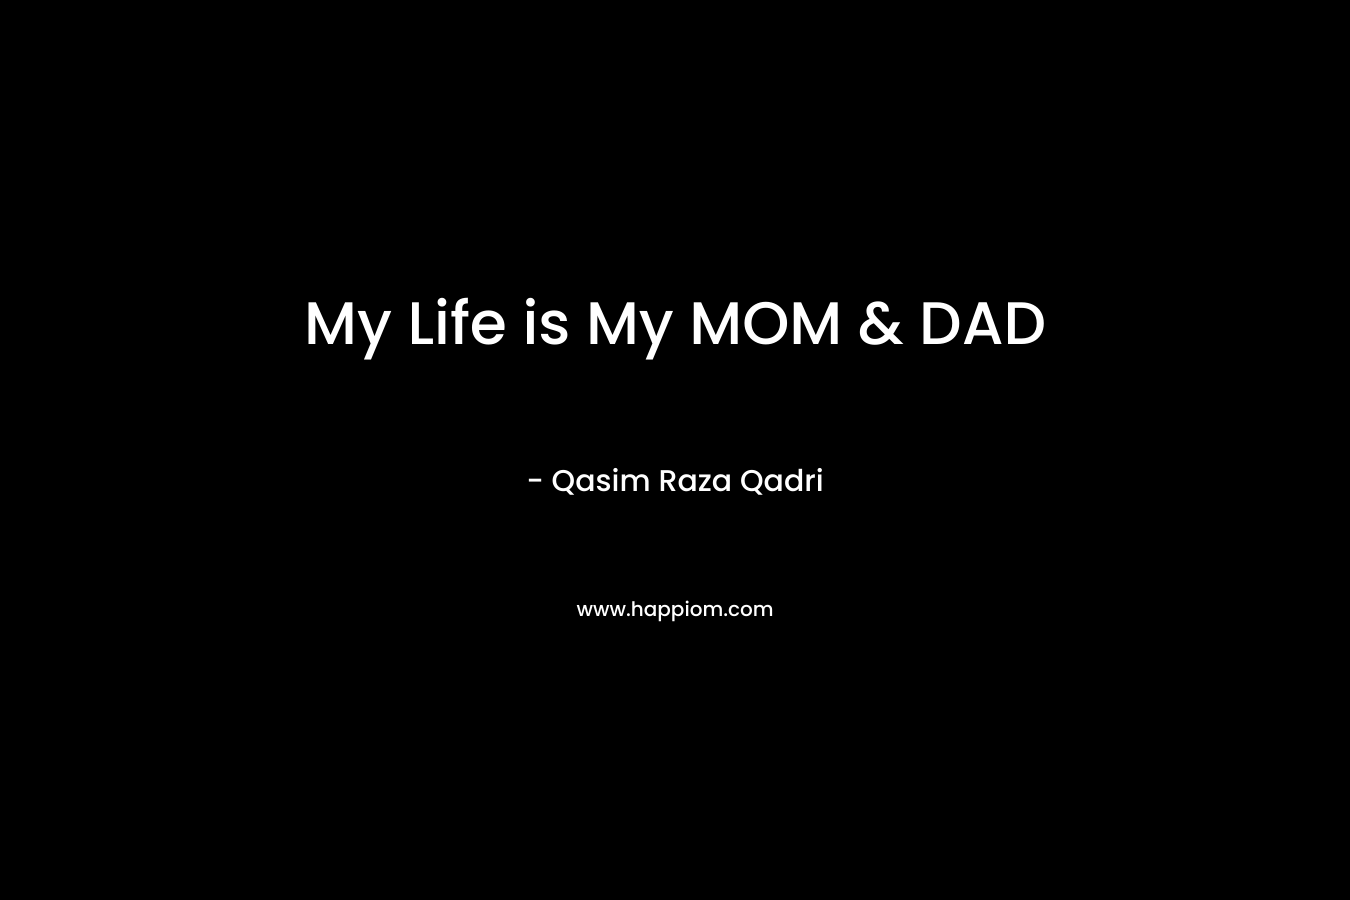 My Life is My MOM & DAD